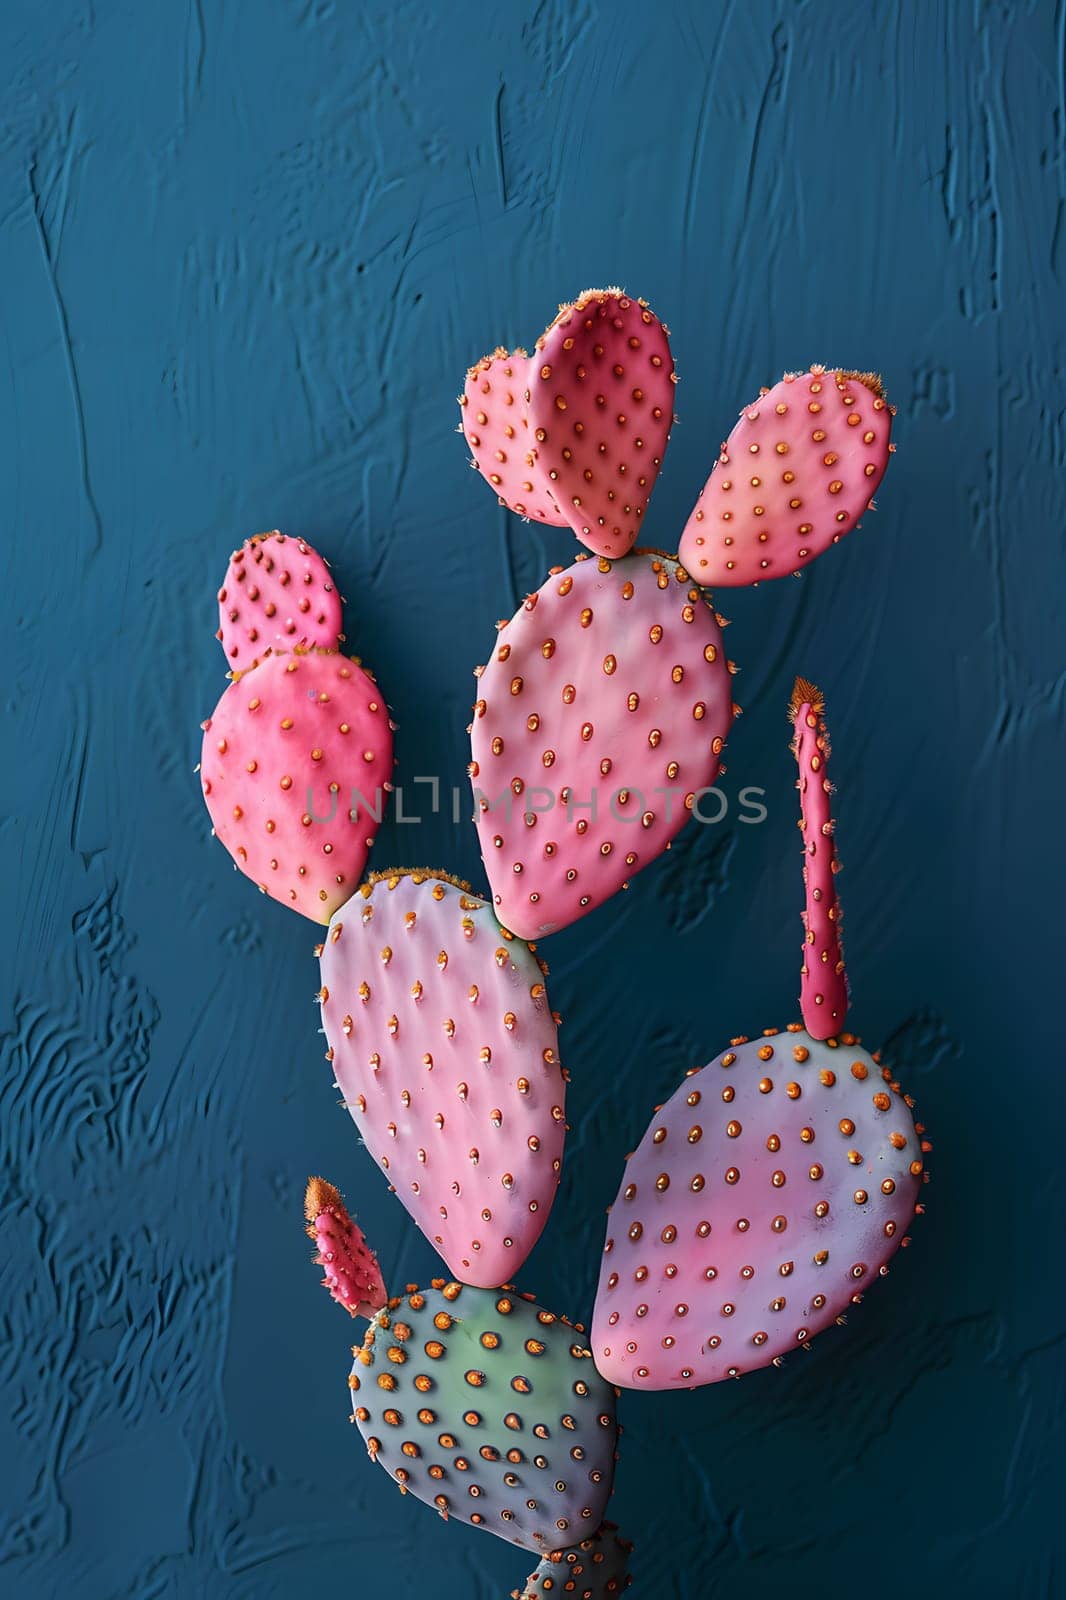 A pink and green cactus, a terrestrial plant, stands against a blue wall, a creative arts decoration. The plant is in a painting with a pattern of pink flowers on its pedicels